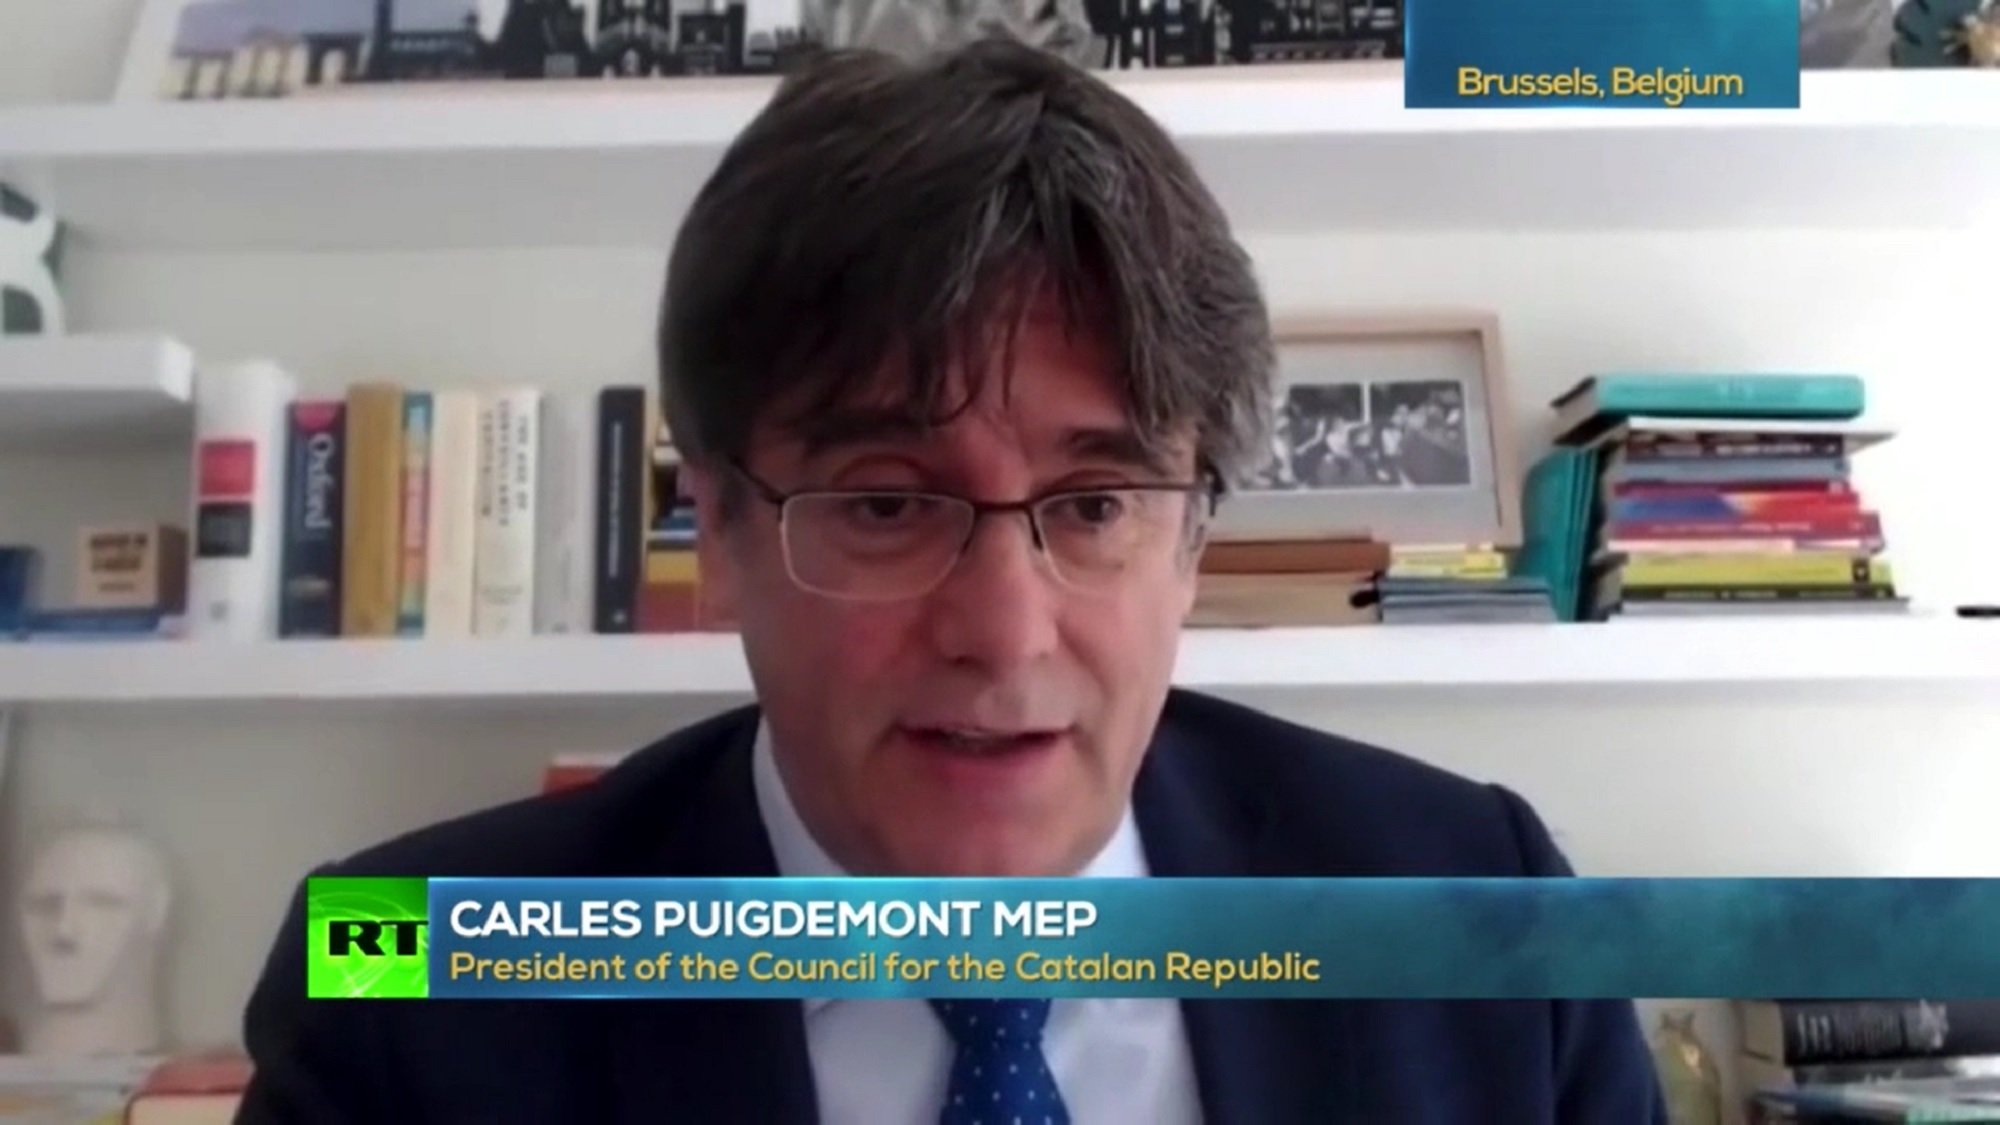 puigdemont-russia-today-deep-state.jpeg